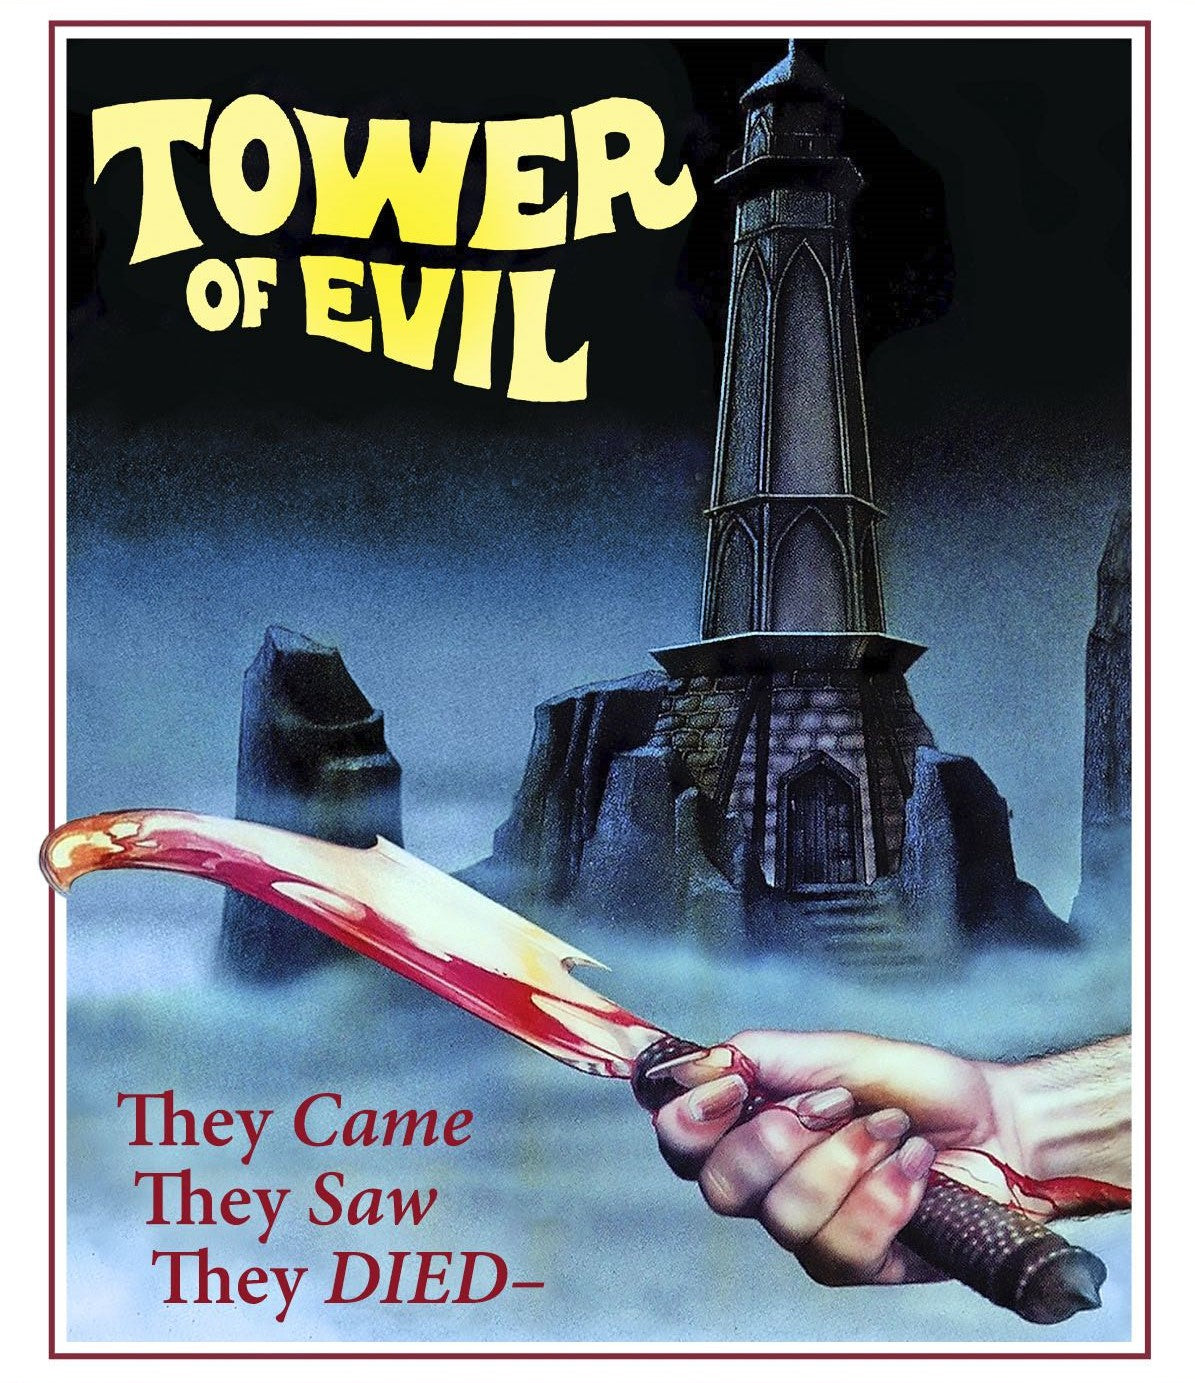 TOWER OF EVIL (RE-ISSUE) BLU-RAY